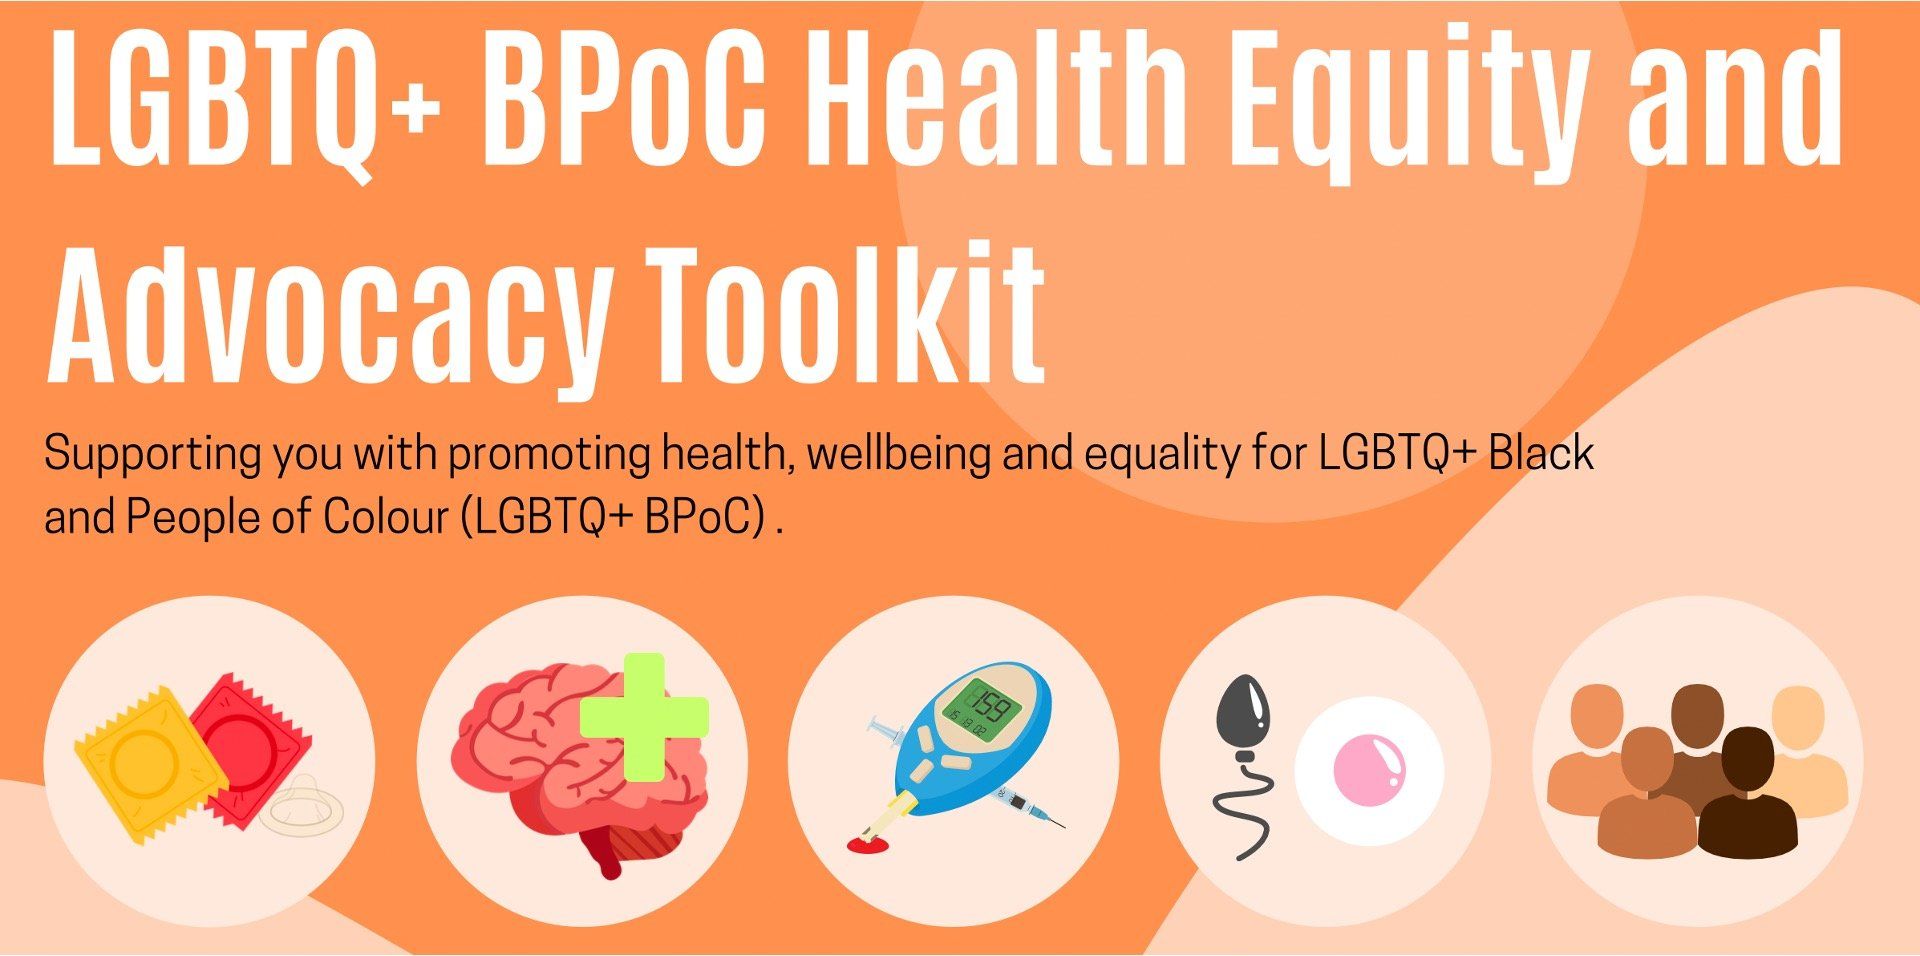 LGBTQ+ BPoC Health Equity and Advocacy Toolkit. Supporting you with promoting health, wellbeing and equality for LGBTQ+ Black and people of colour.